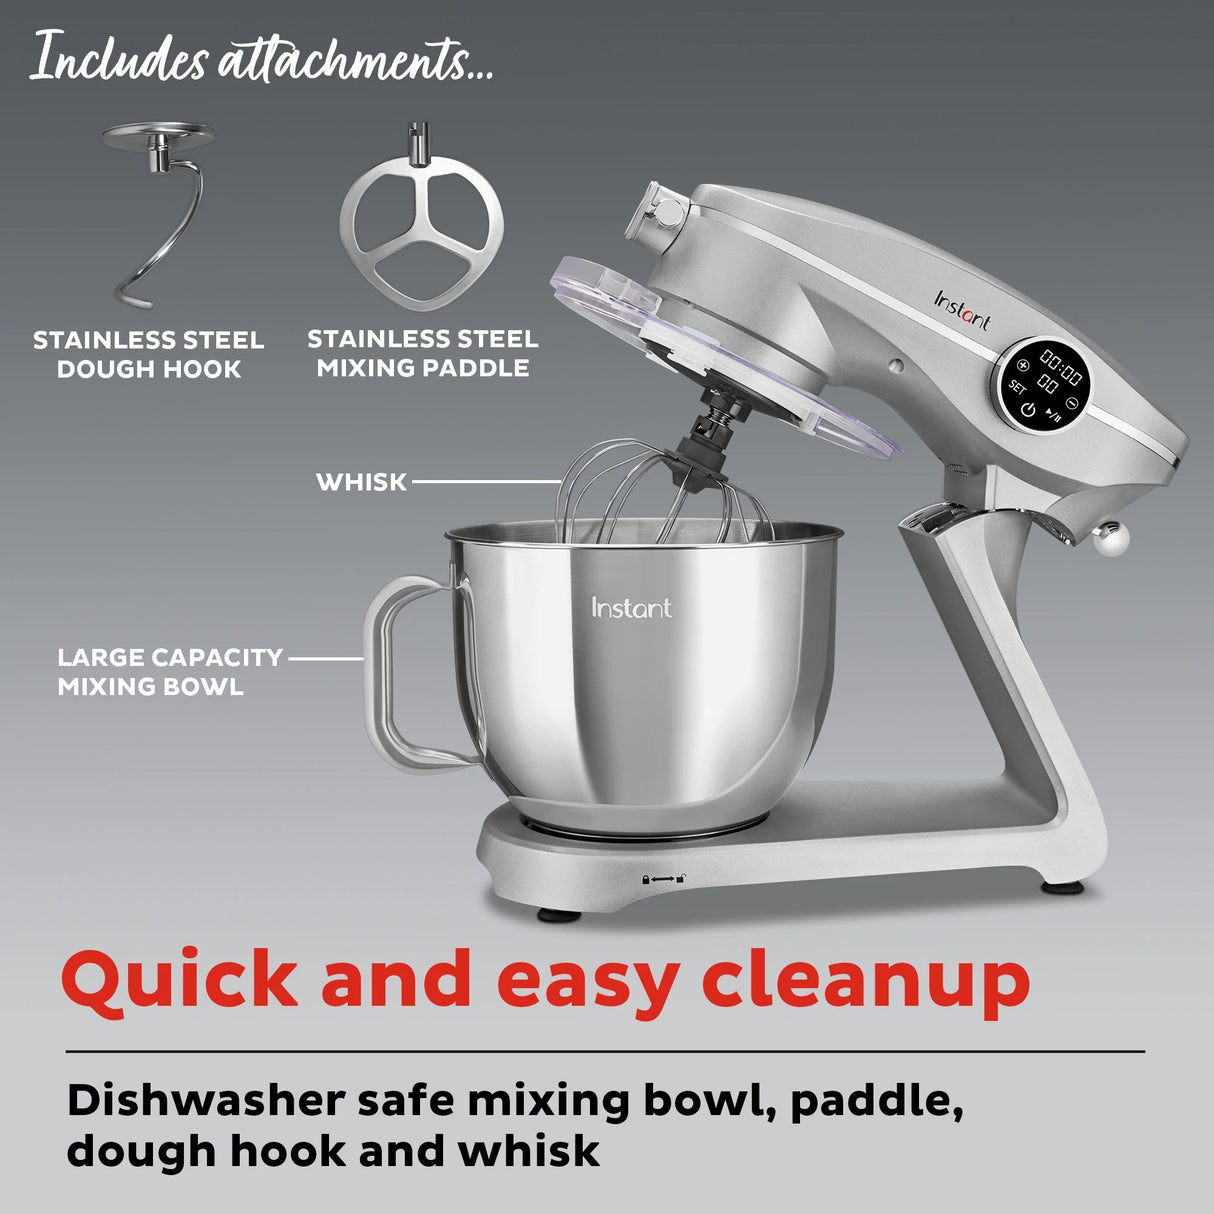  Instant 7.4-quart Stand Mixer Pro Series, Silver with text includes dough hook and mixing paddle